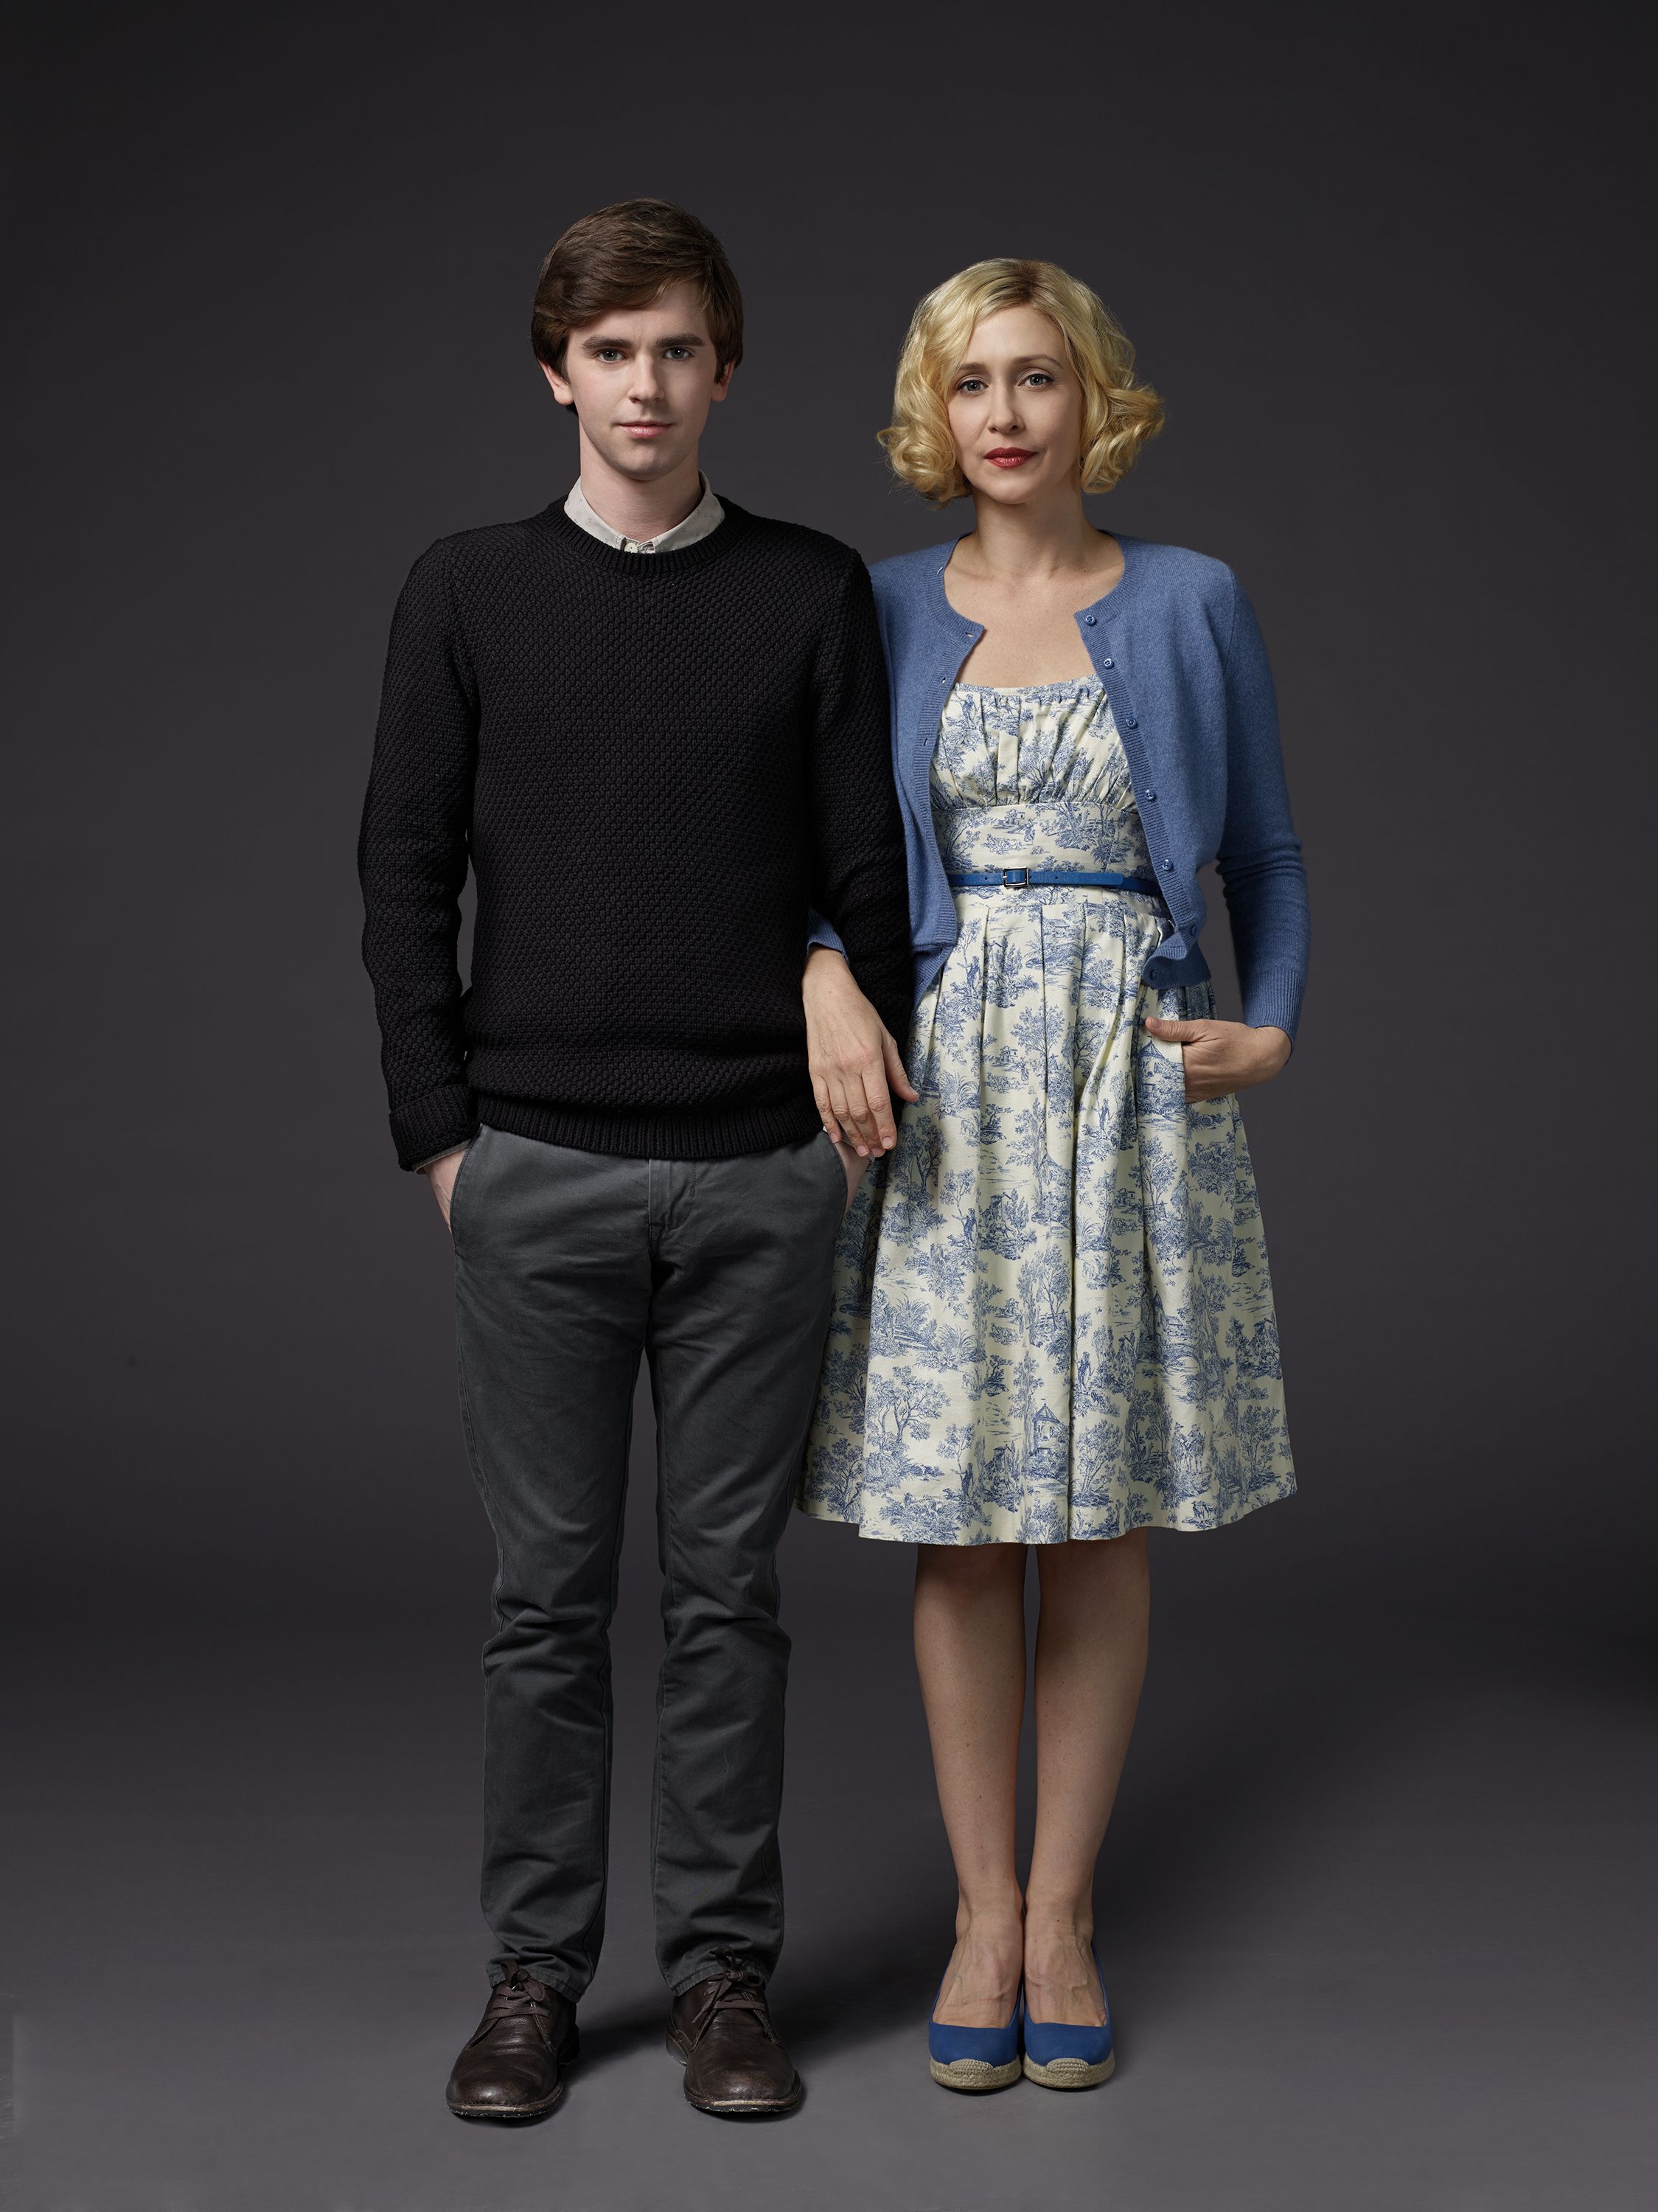 Bates Motel Season 3 Norman and Norma Bates Official Picture Motel Photo